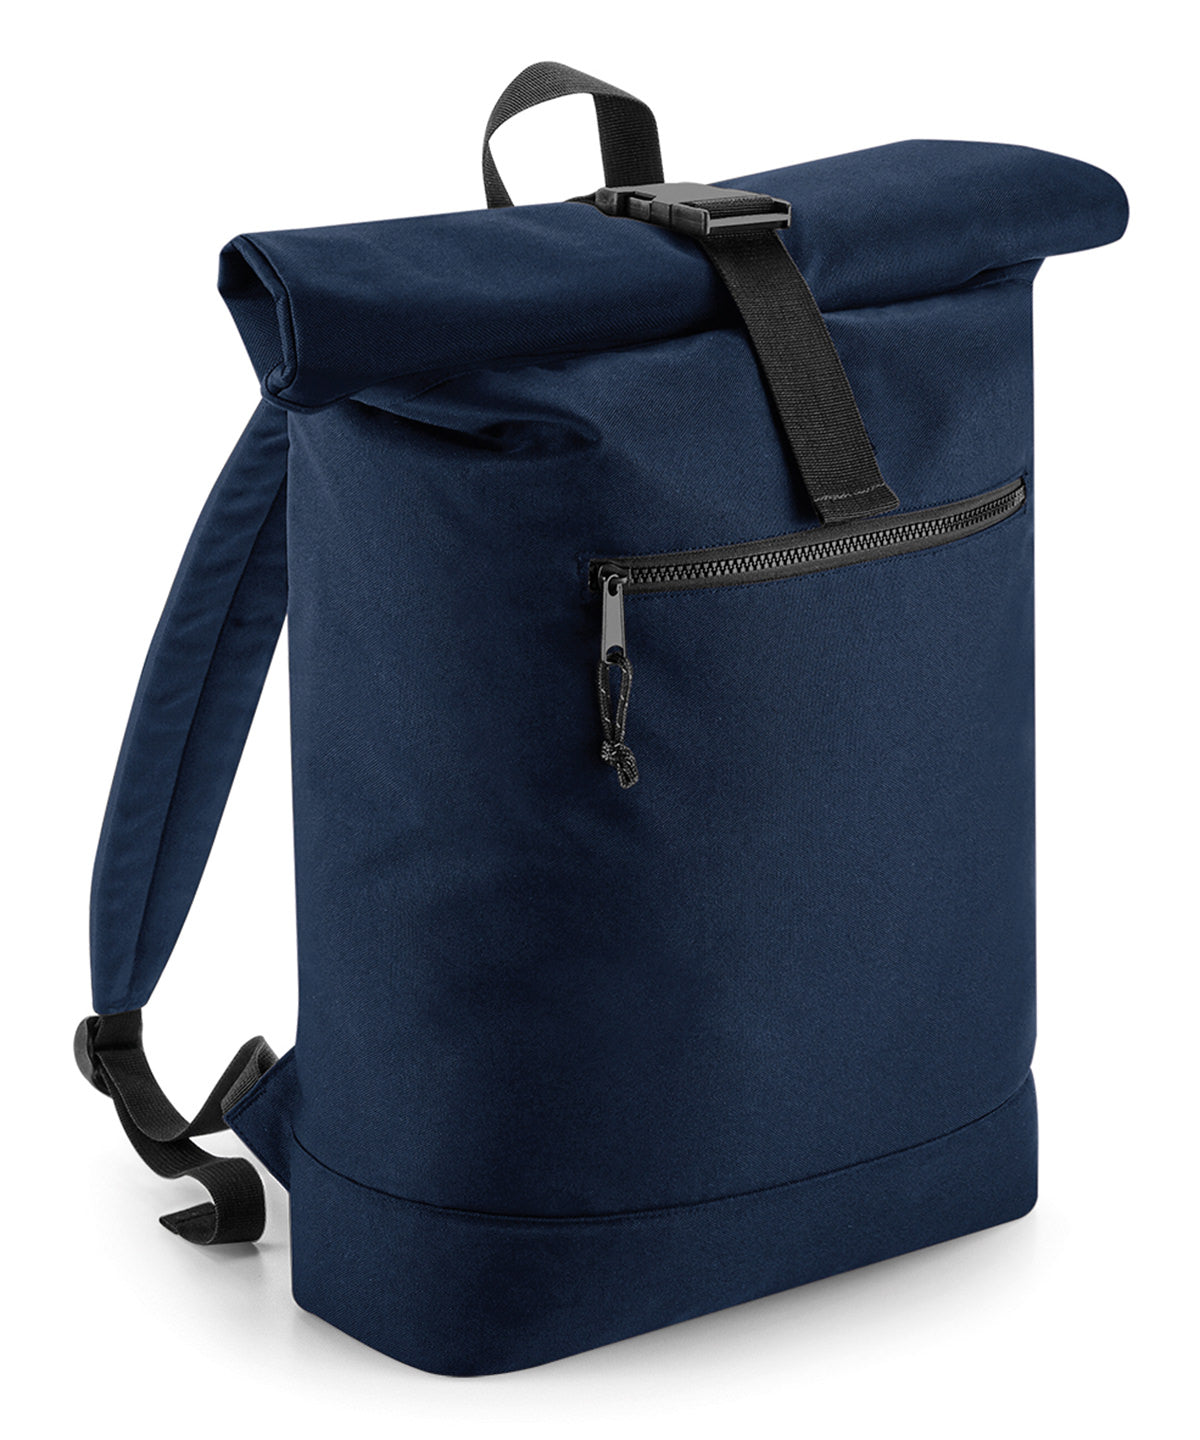 Töskur - Recycled Rolled-top Backpack